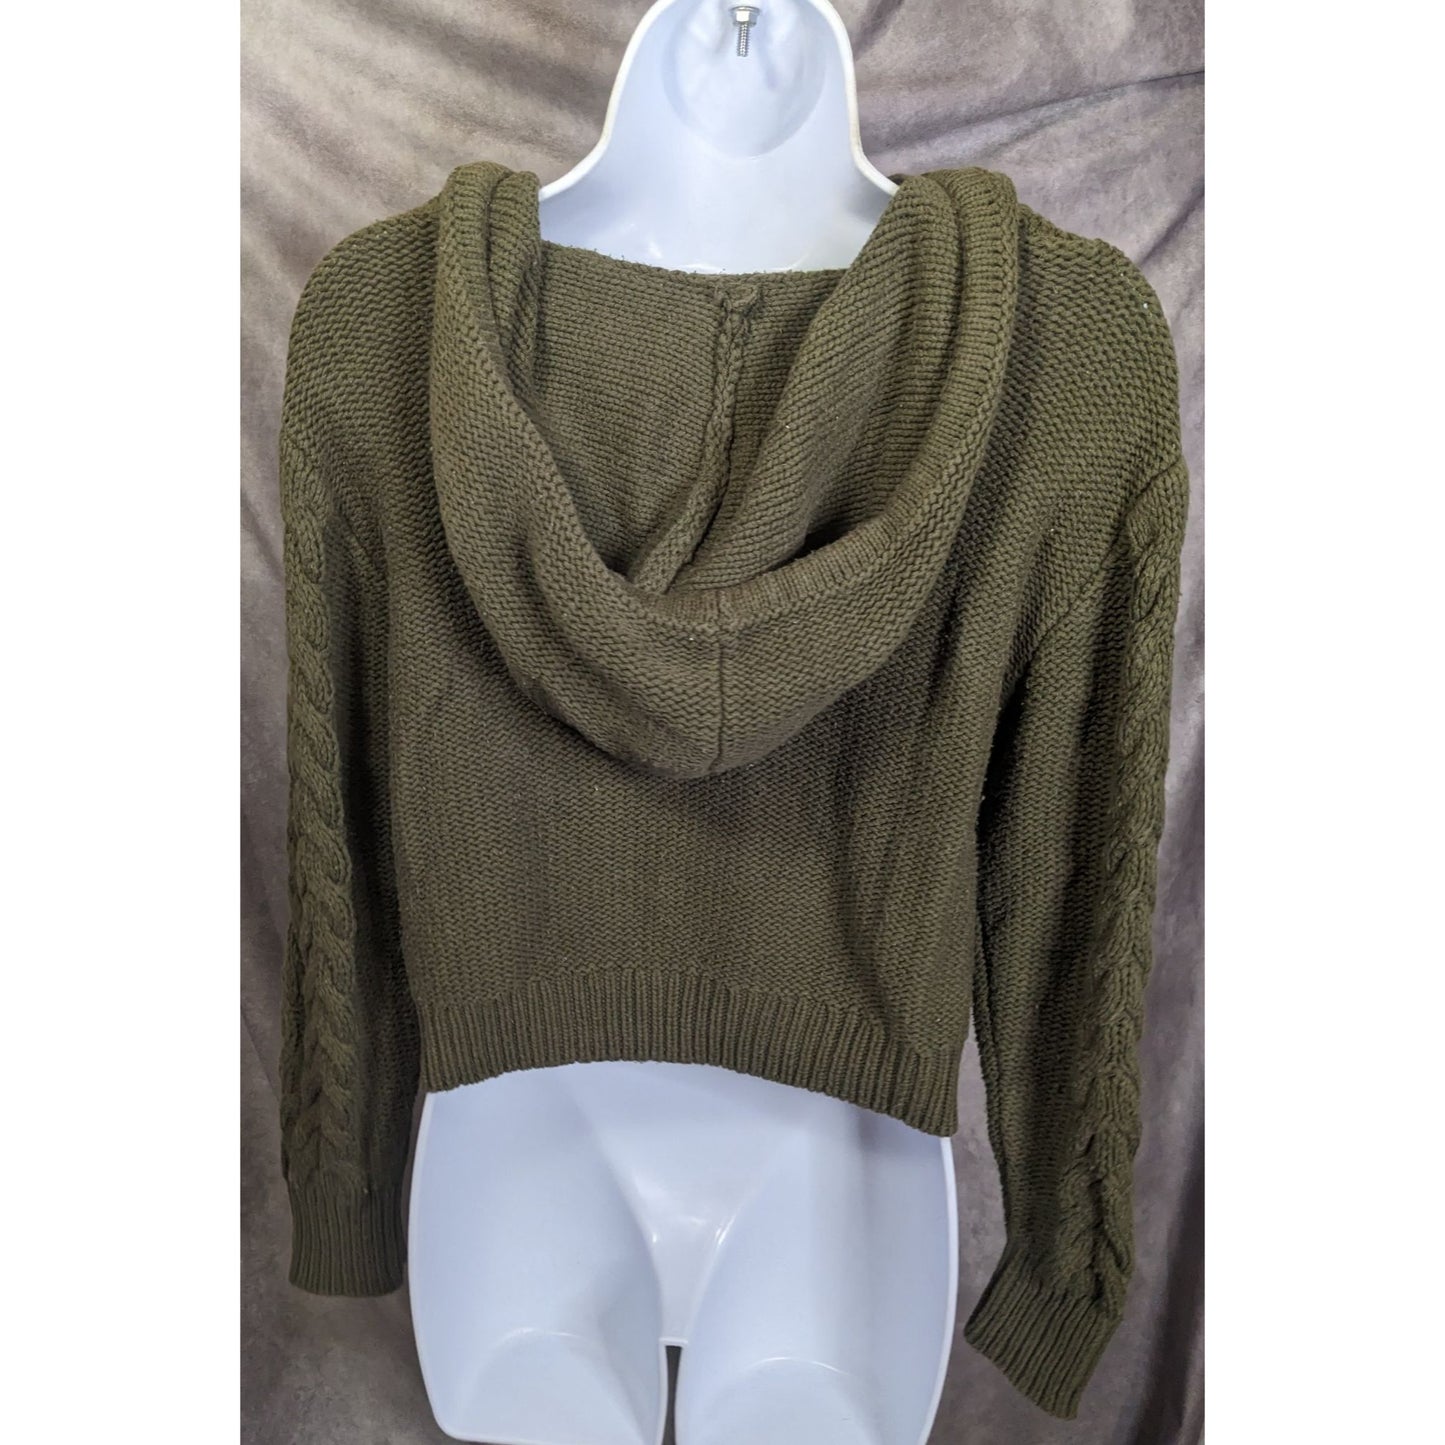 Aeropostale Army Green Cable Knit Hooded Sweater